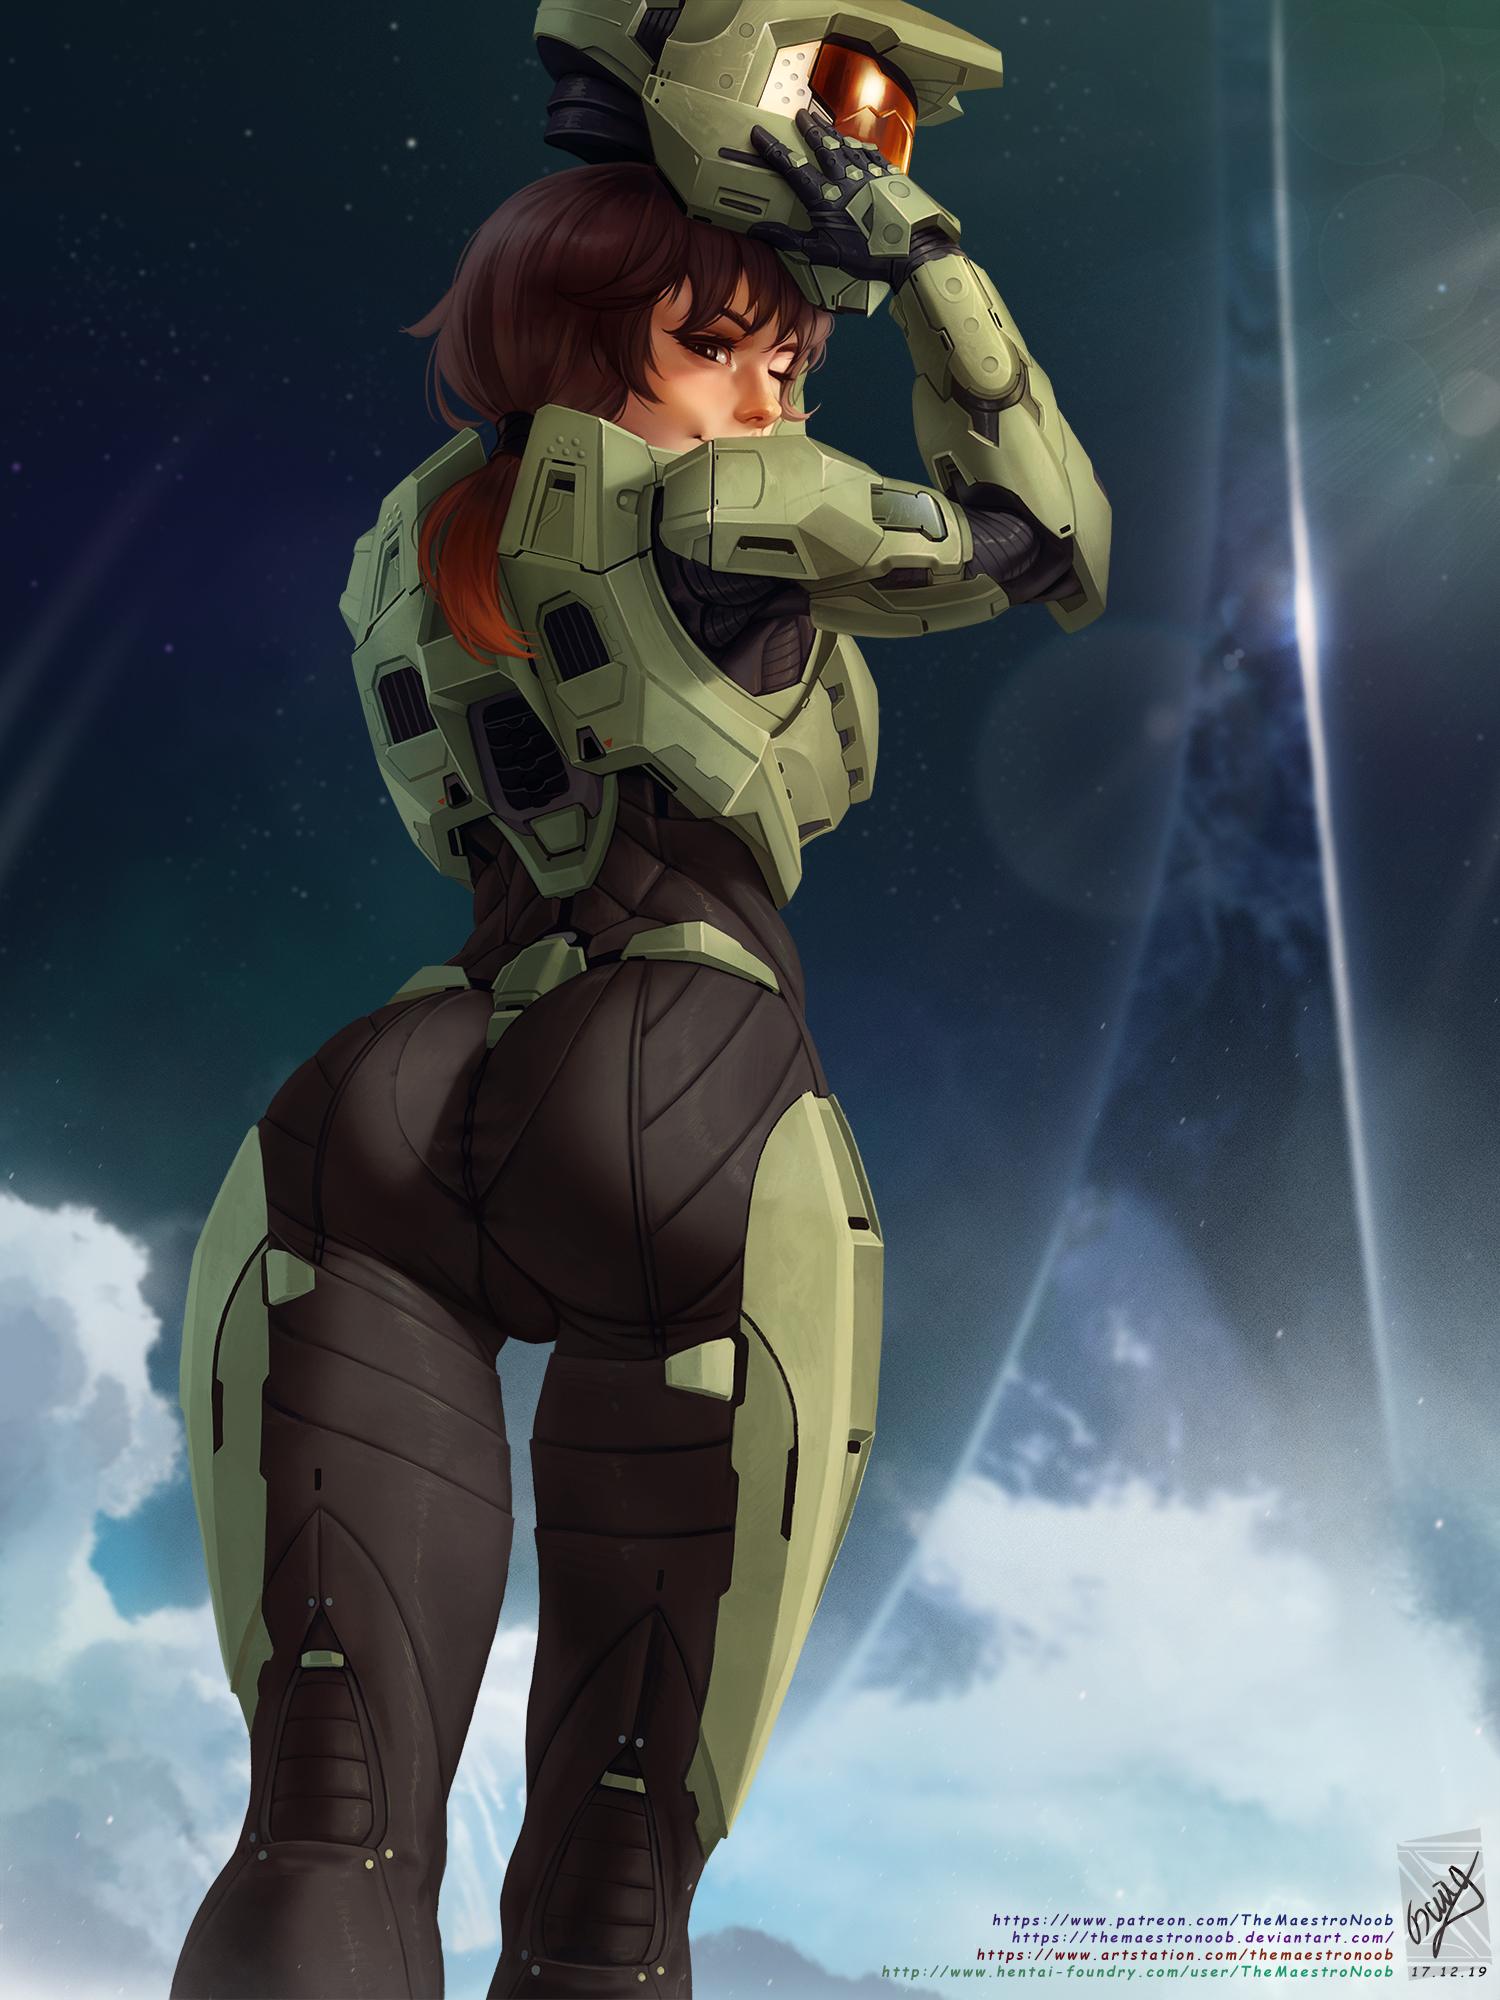 General 1500x2000 Halo (game) Halo 4 Halo 5: Guardians 2D ass fantasy armor female version female warrior thighs looking at viewer brunette Spartans helmet brown eyes the gap TheMaestroNoob one eye closed long hair portrait display fan art video game characters genderswap DeviantArt armor science fiction Master Chief (Halo) low-angle watermarked